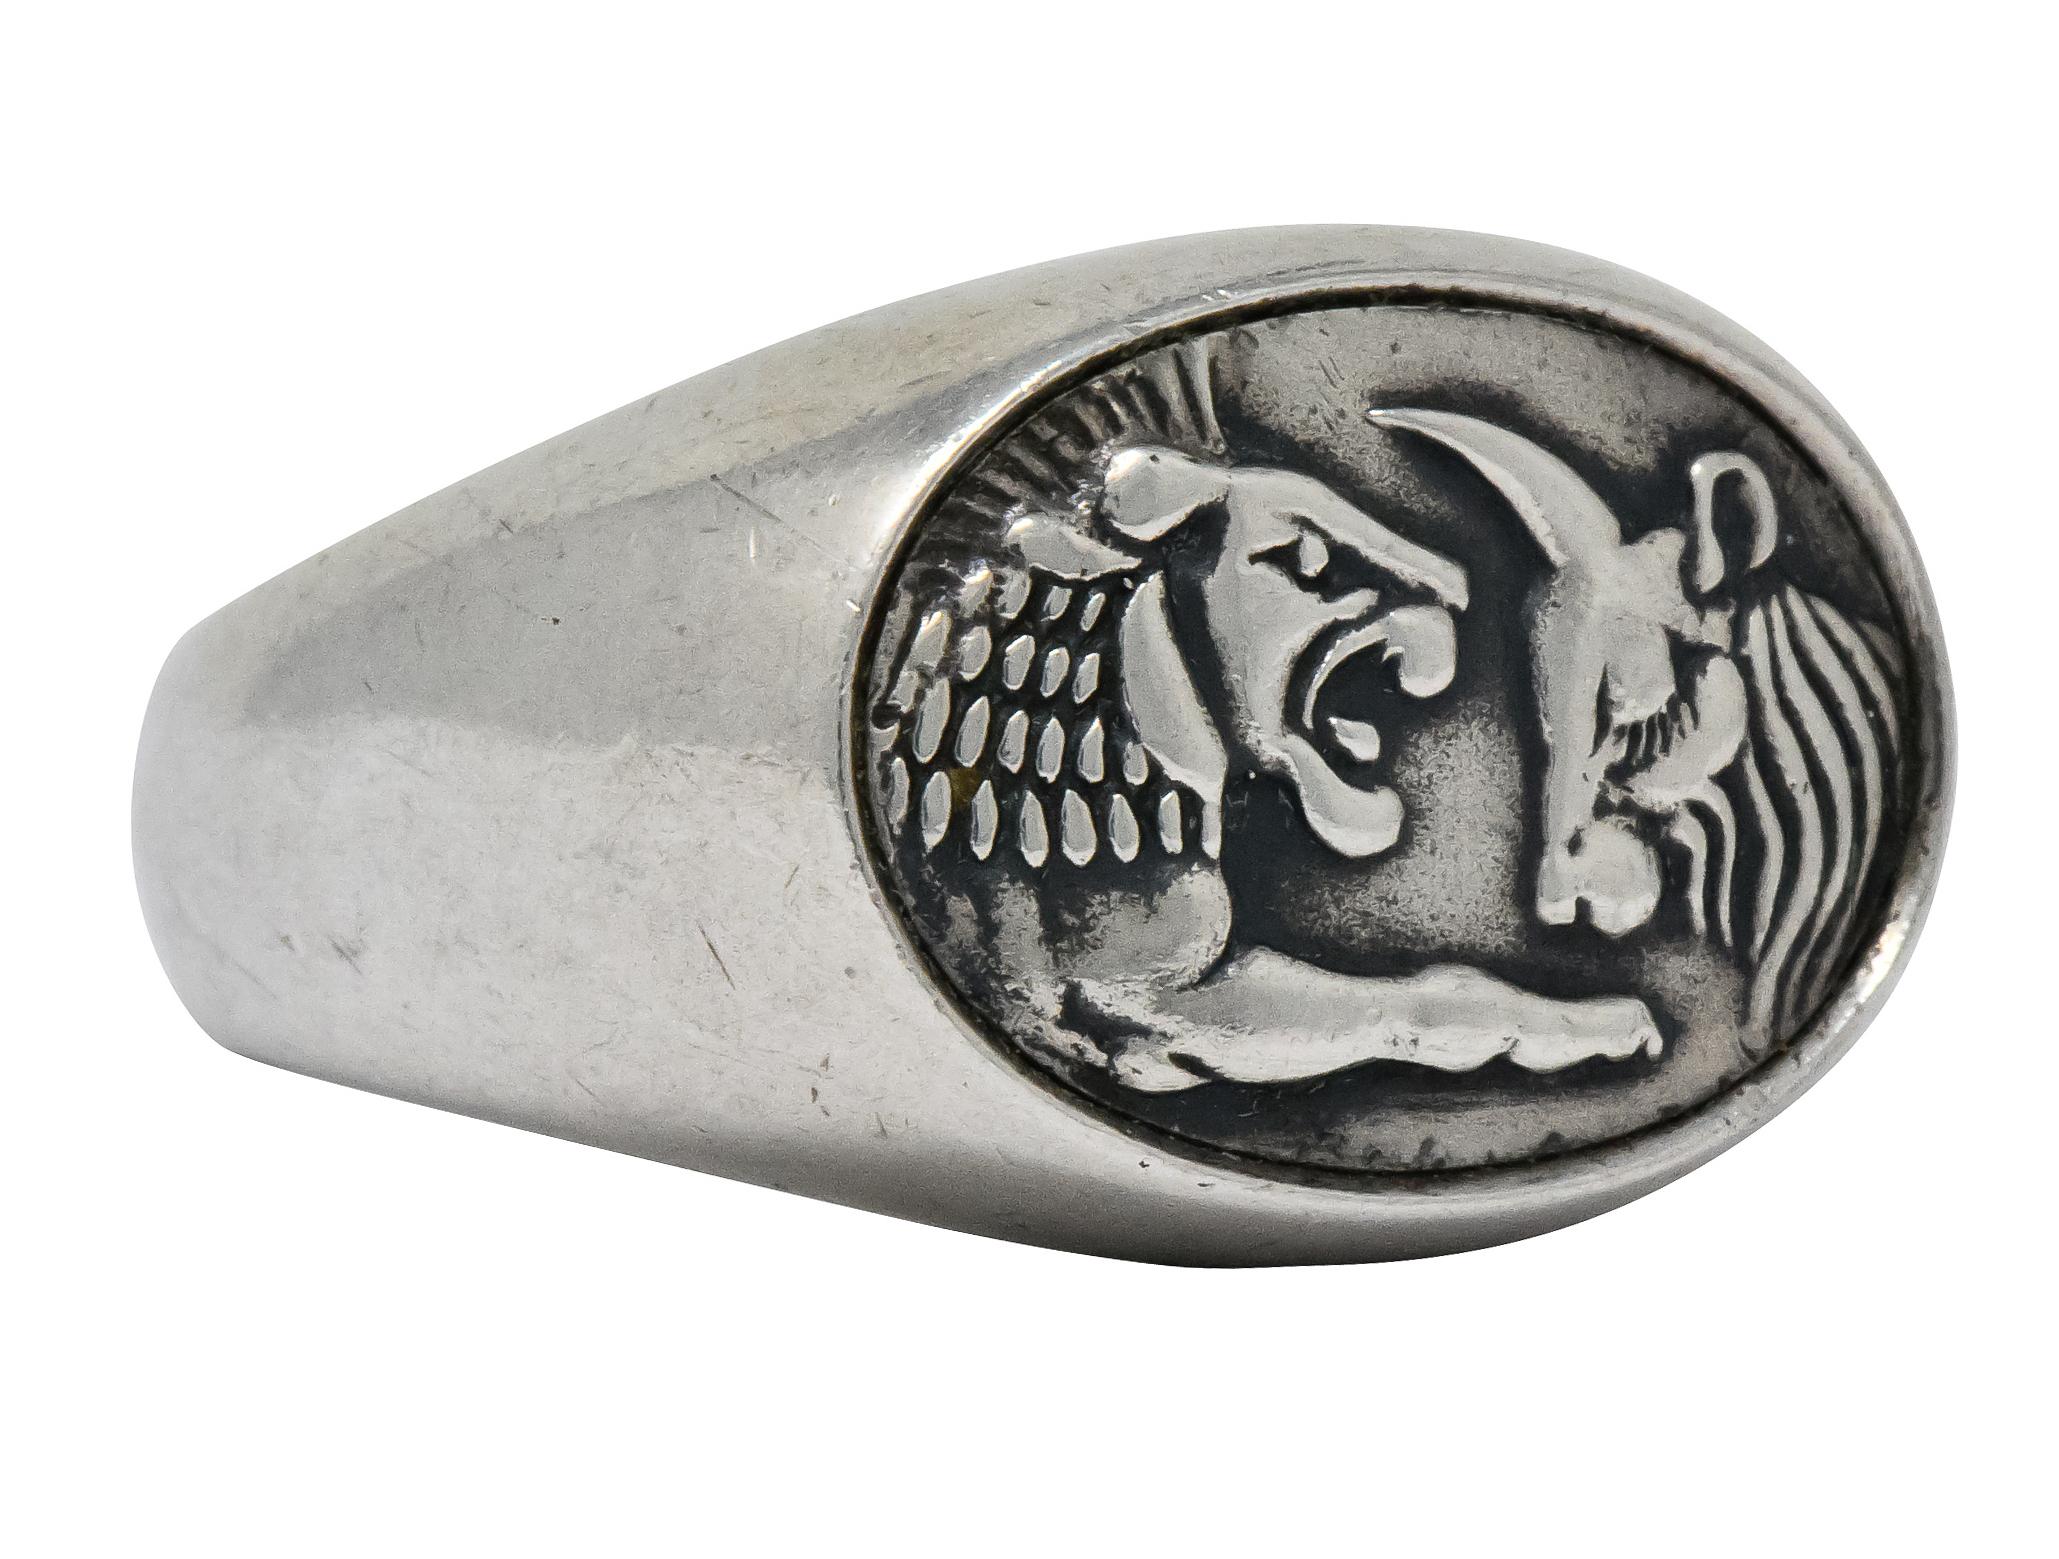 Oval, high relief depiction of lion roaring at passive ox

From David Yurman's Petrvs collection

With 22 karat gold David Yurman maker's mark

Stamped 925, 22k, and DY for David Yurman

Ring Size: 10 & Not Sizable

Measures: 16.1 x 22.7 mm and sits